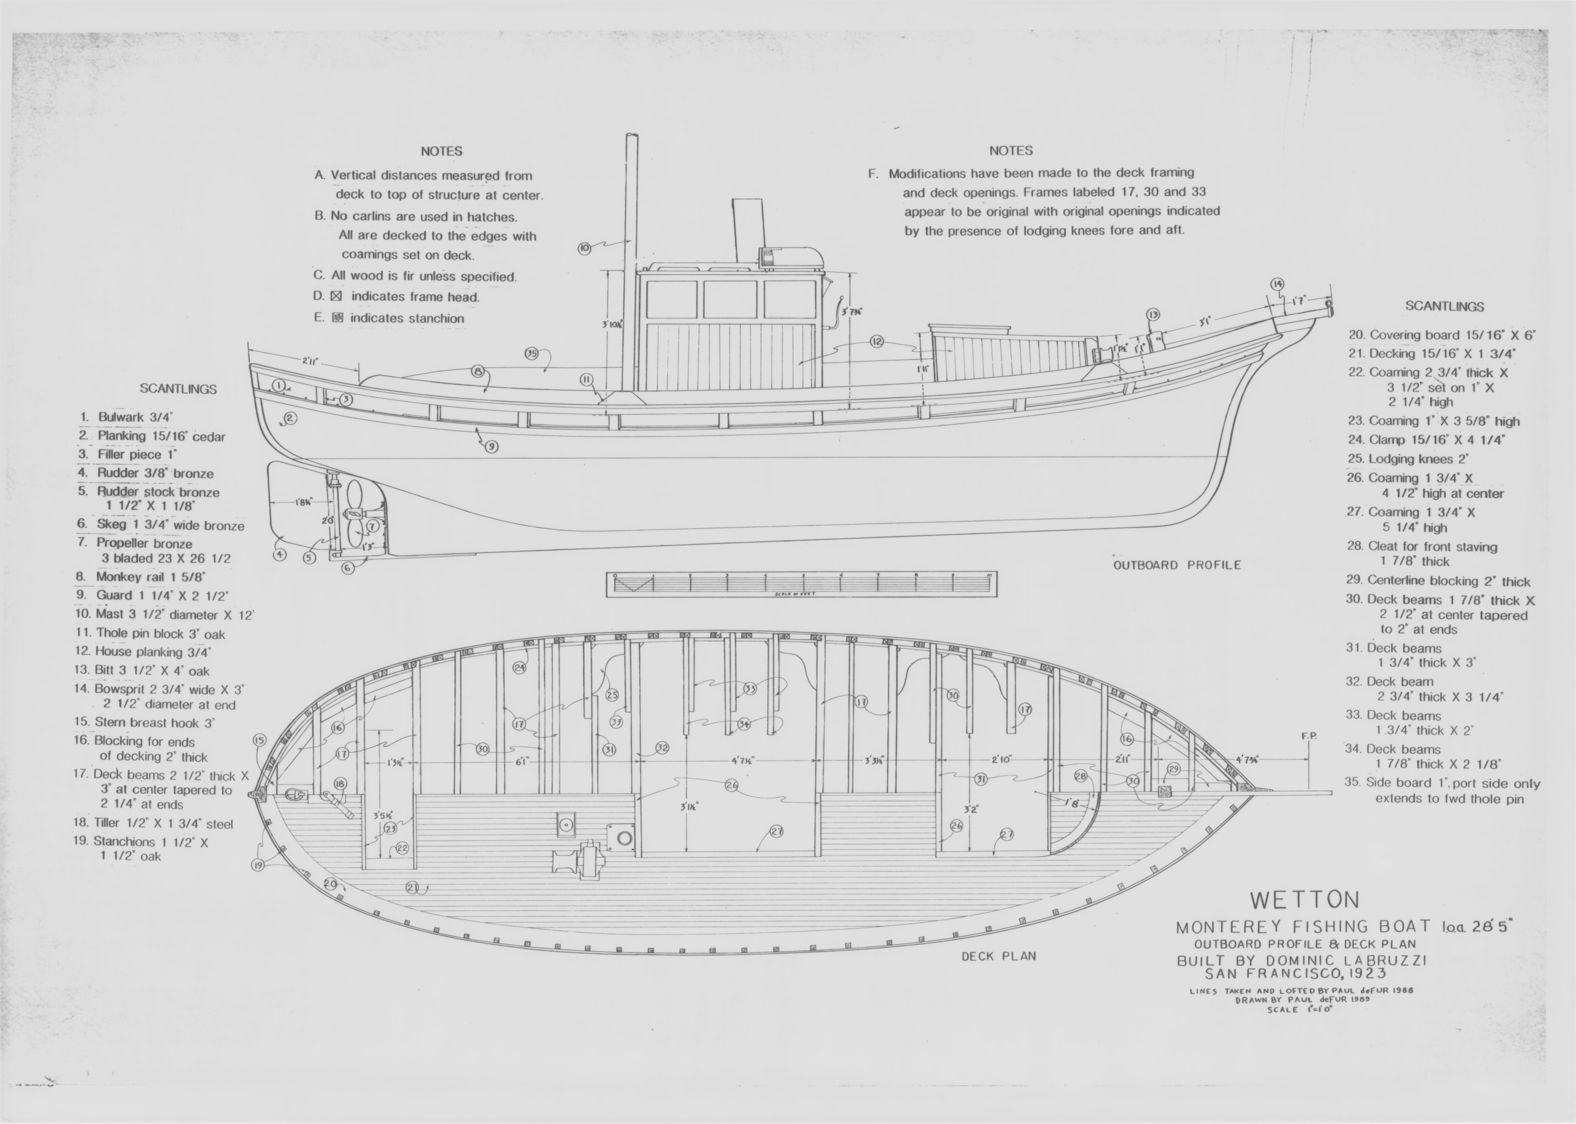 Monterey fishing boat : plans package : includes 3 original drawings.